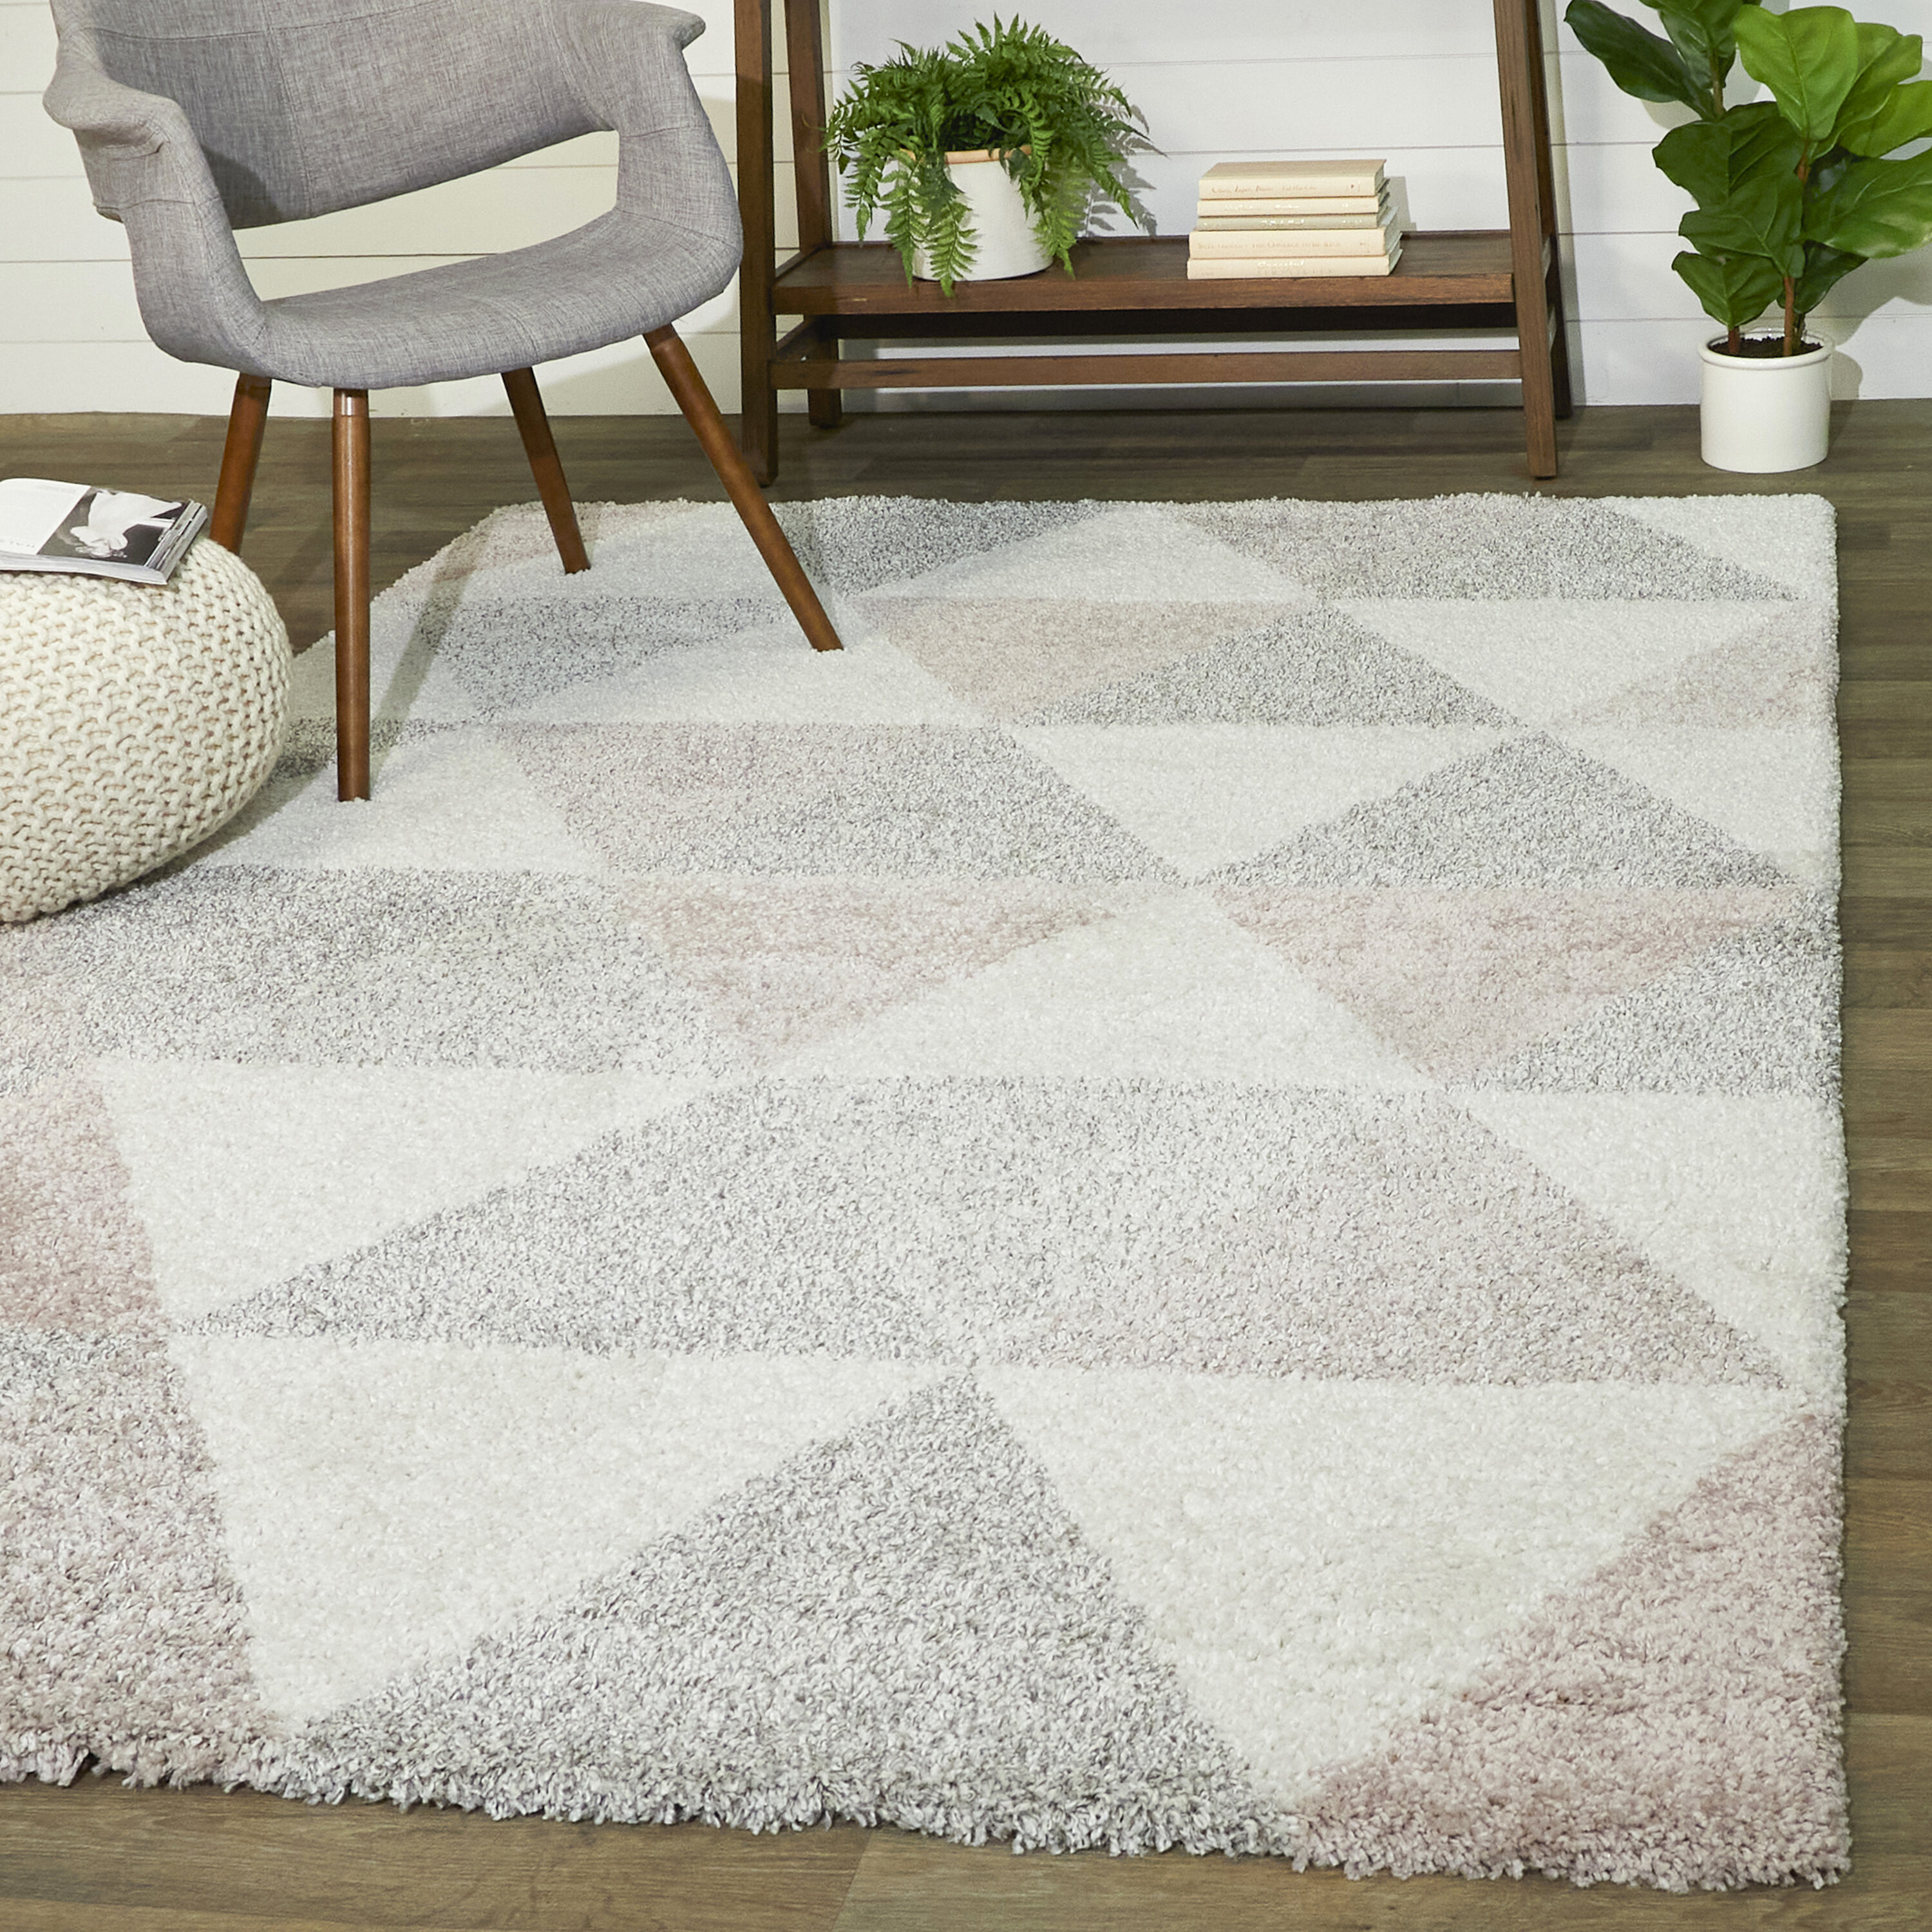 New Natural Rug for Living Room Geometric Retro Square Modern Beige Area Rugs UK 